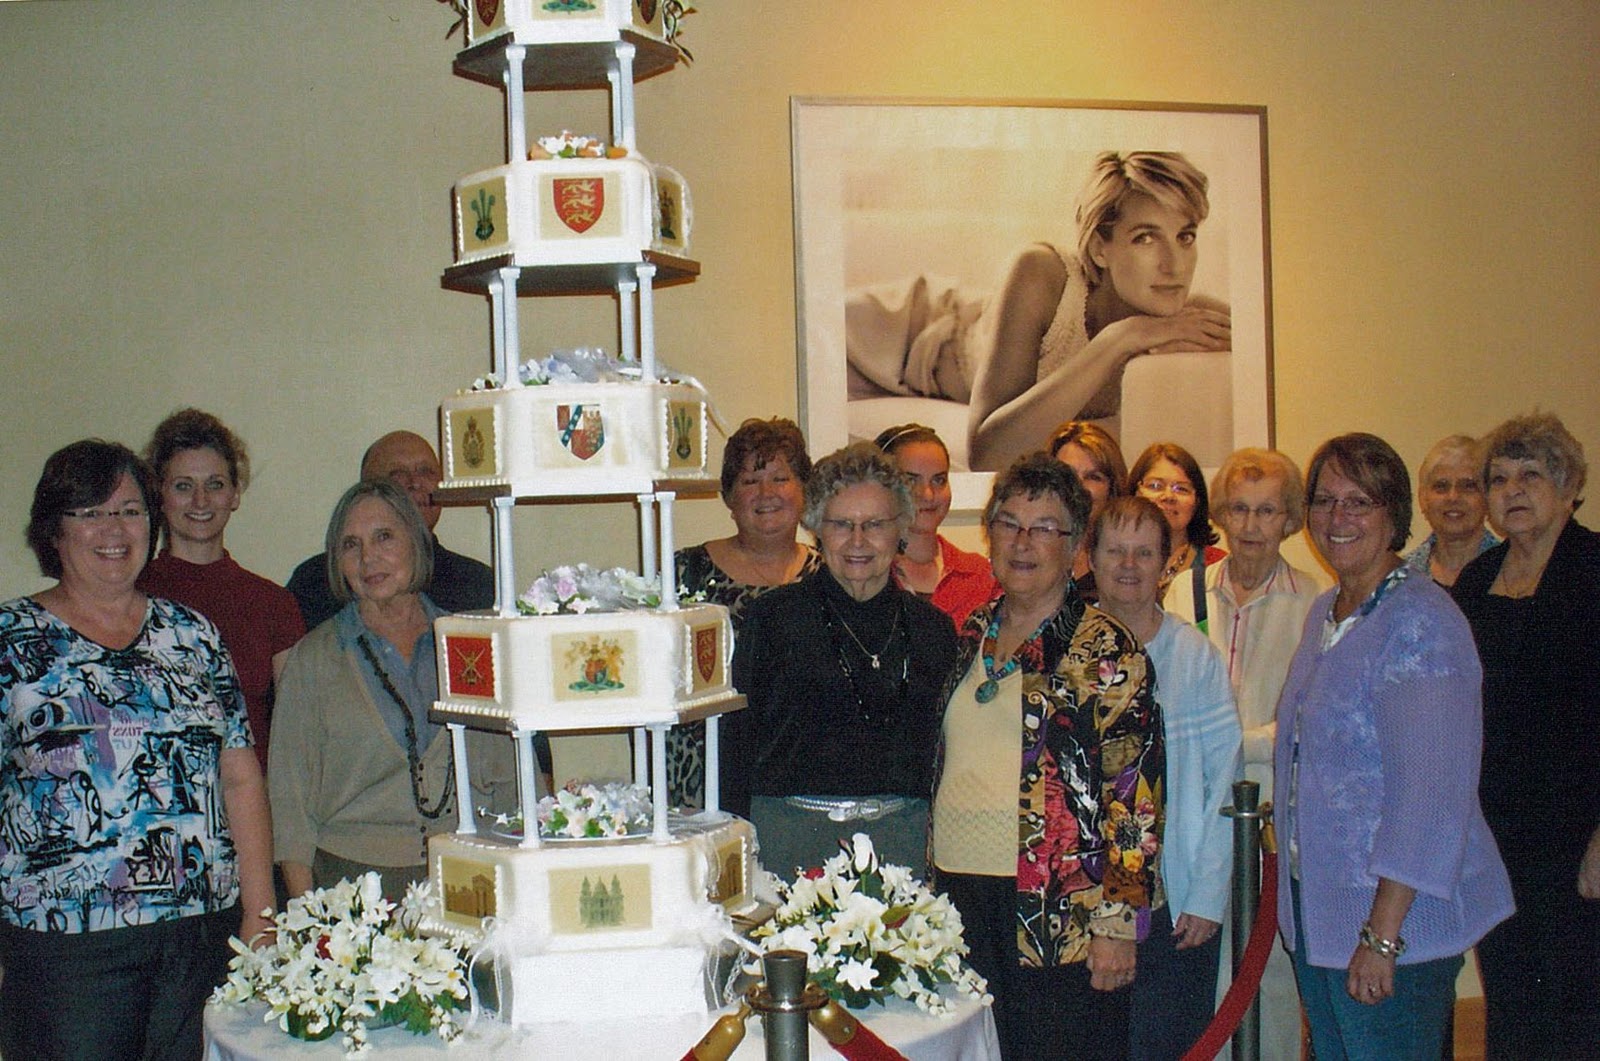 of the wedding cake from